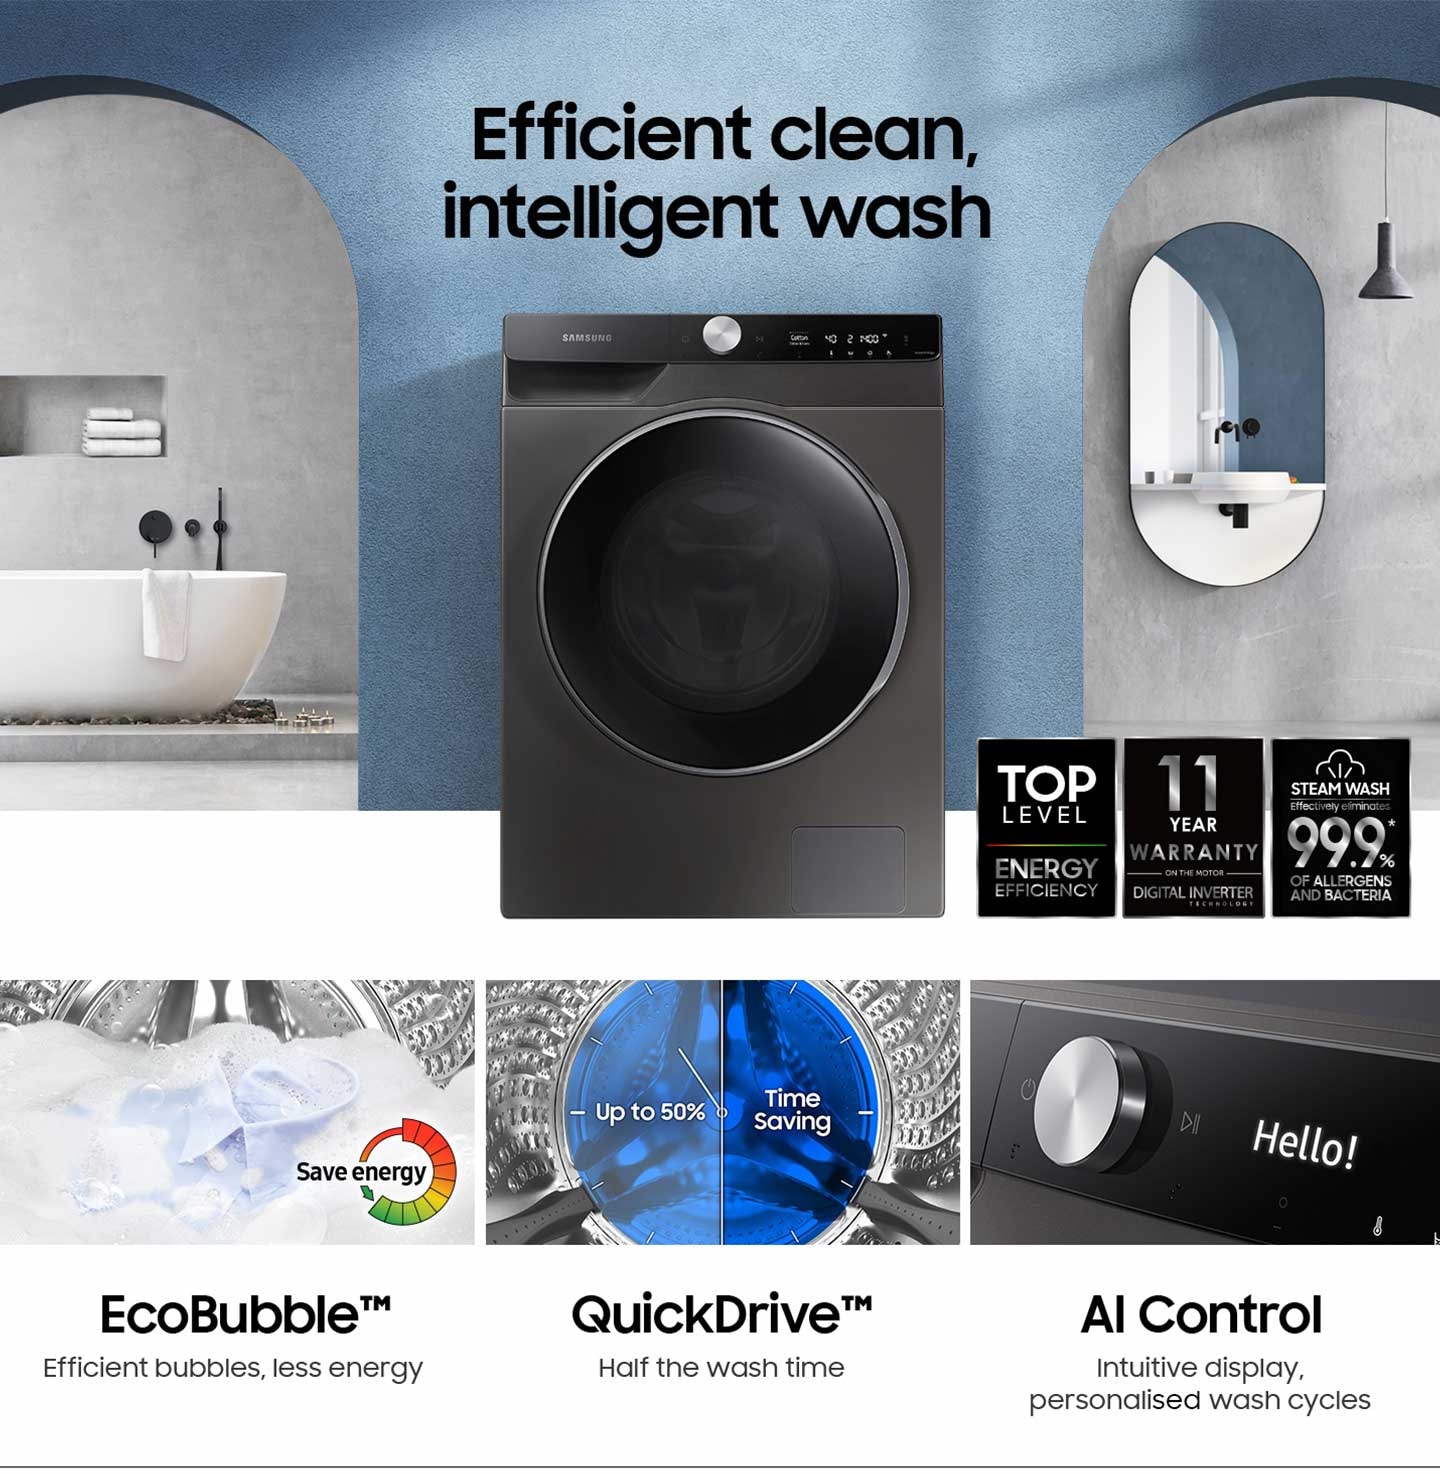  WW7400T features efficient clean, intelligent wash. It has Top level of energy efficiency, 10 year warranty on the DIT motor and effectively eliminates 99.9% of allergens and bacteria with steam wash. Eco Bubble saves energy as create bubble efficiently with less energy. Quick Drive is Time saving function which half the wash time up to 50%. AI control intuitively displays and personalizes wash cycles.